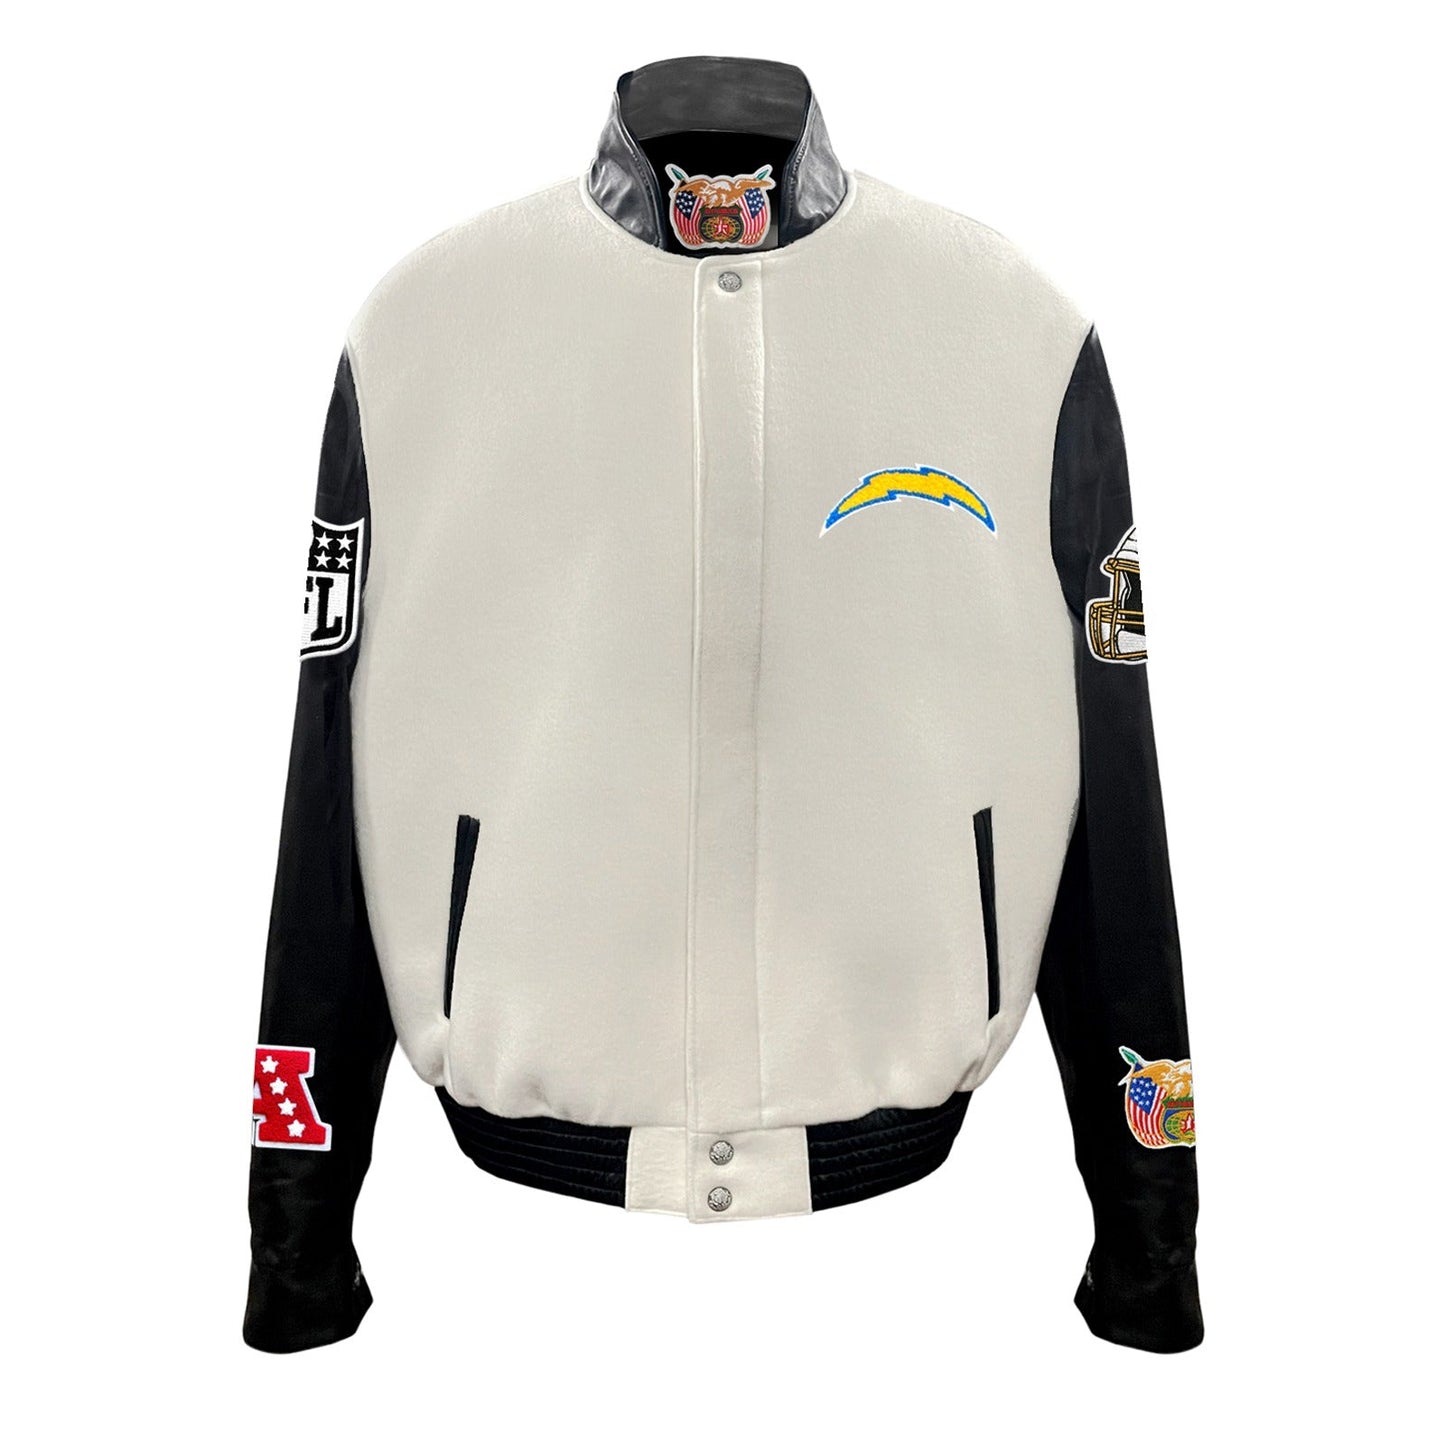 LOS ANGELES CHARGERS WOOL & LEATHER VARSITY JACKET Off White/Black